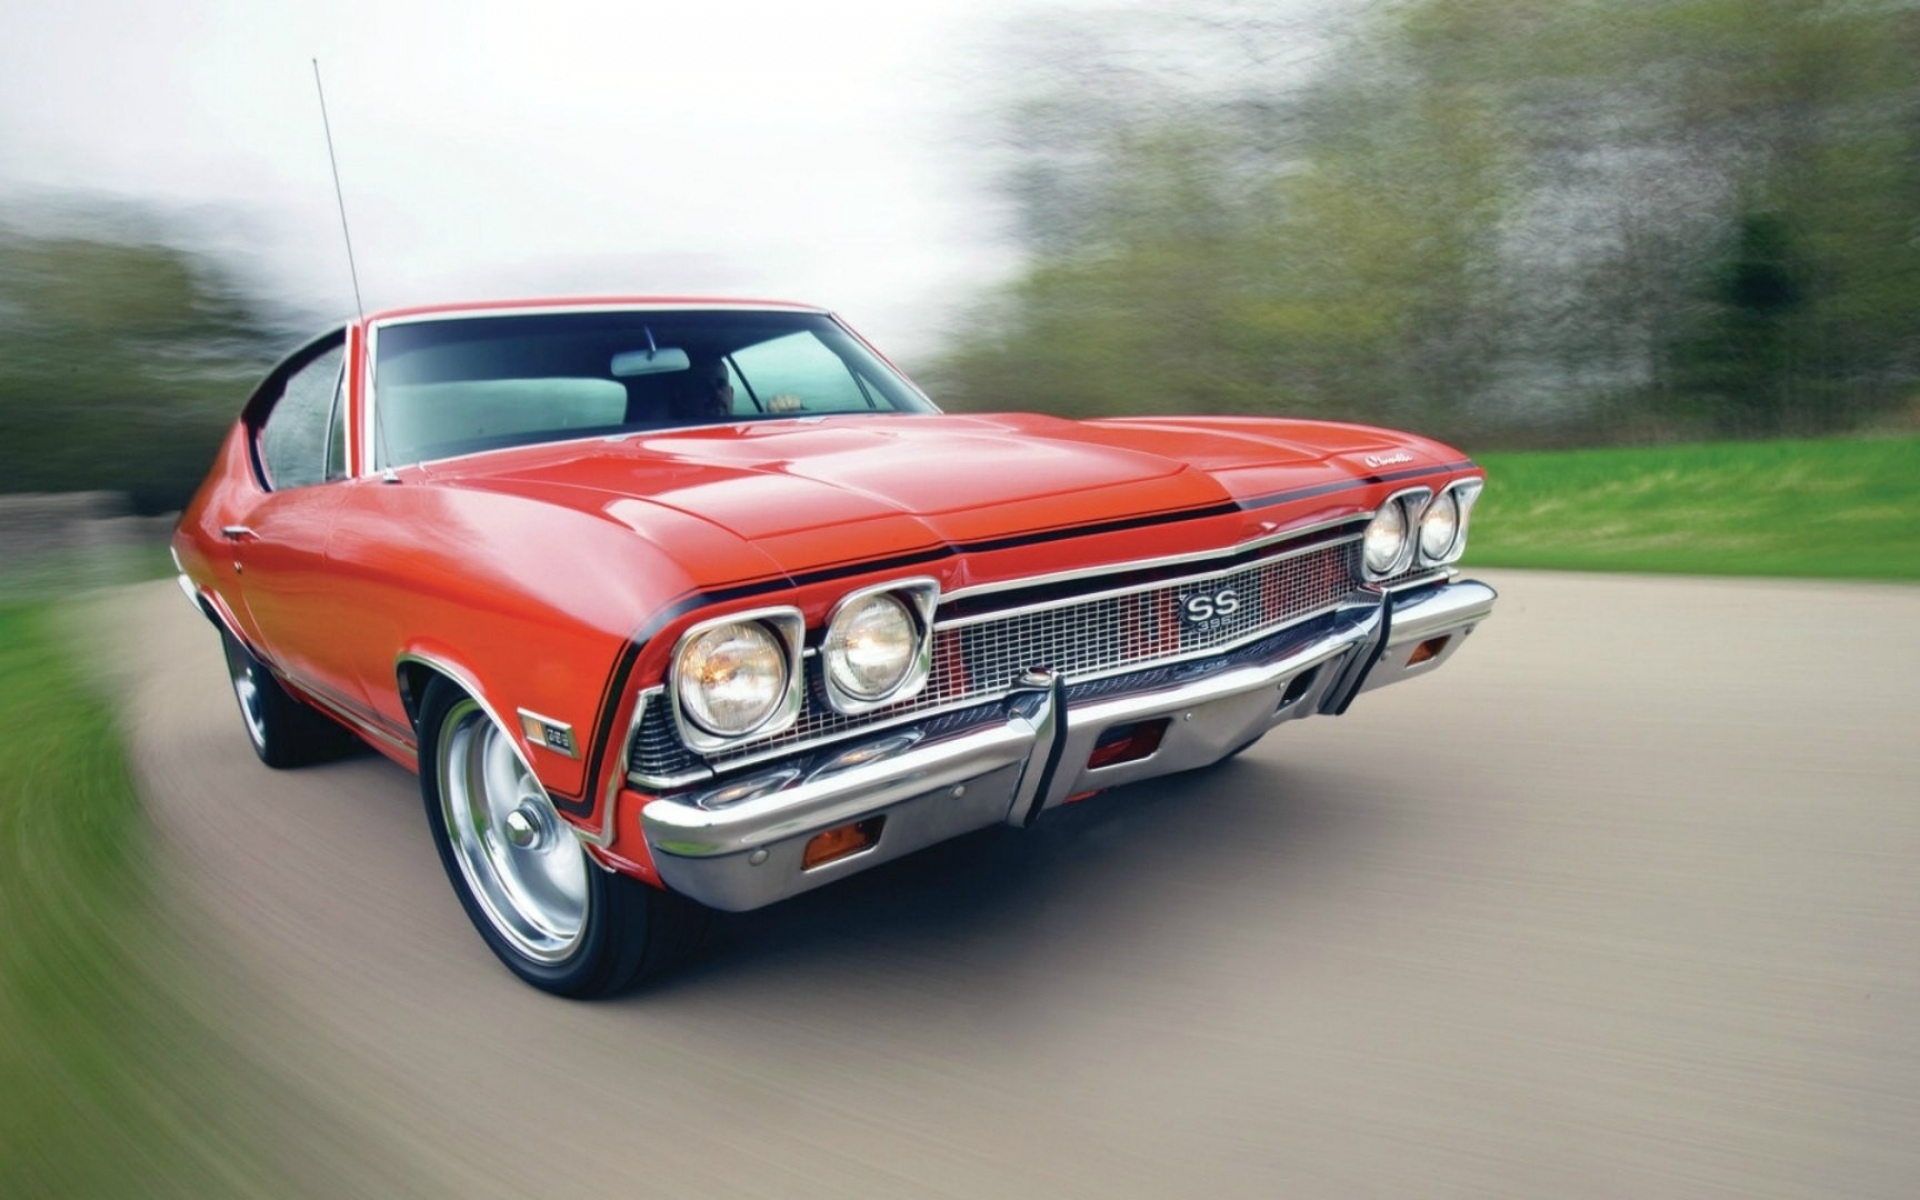  cars chevrolet muscle car Wallpaper Wallpapers Download 1920x1200